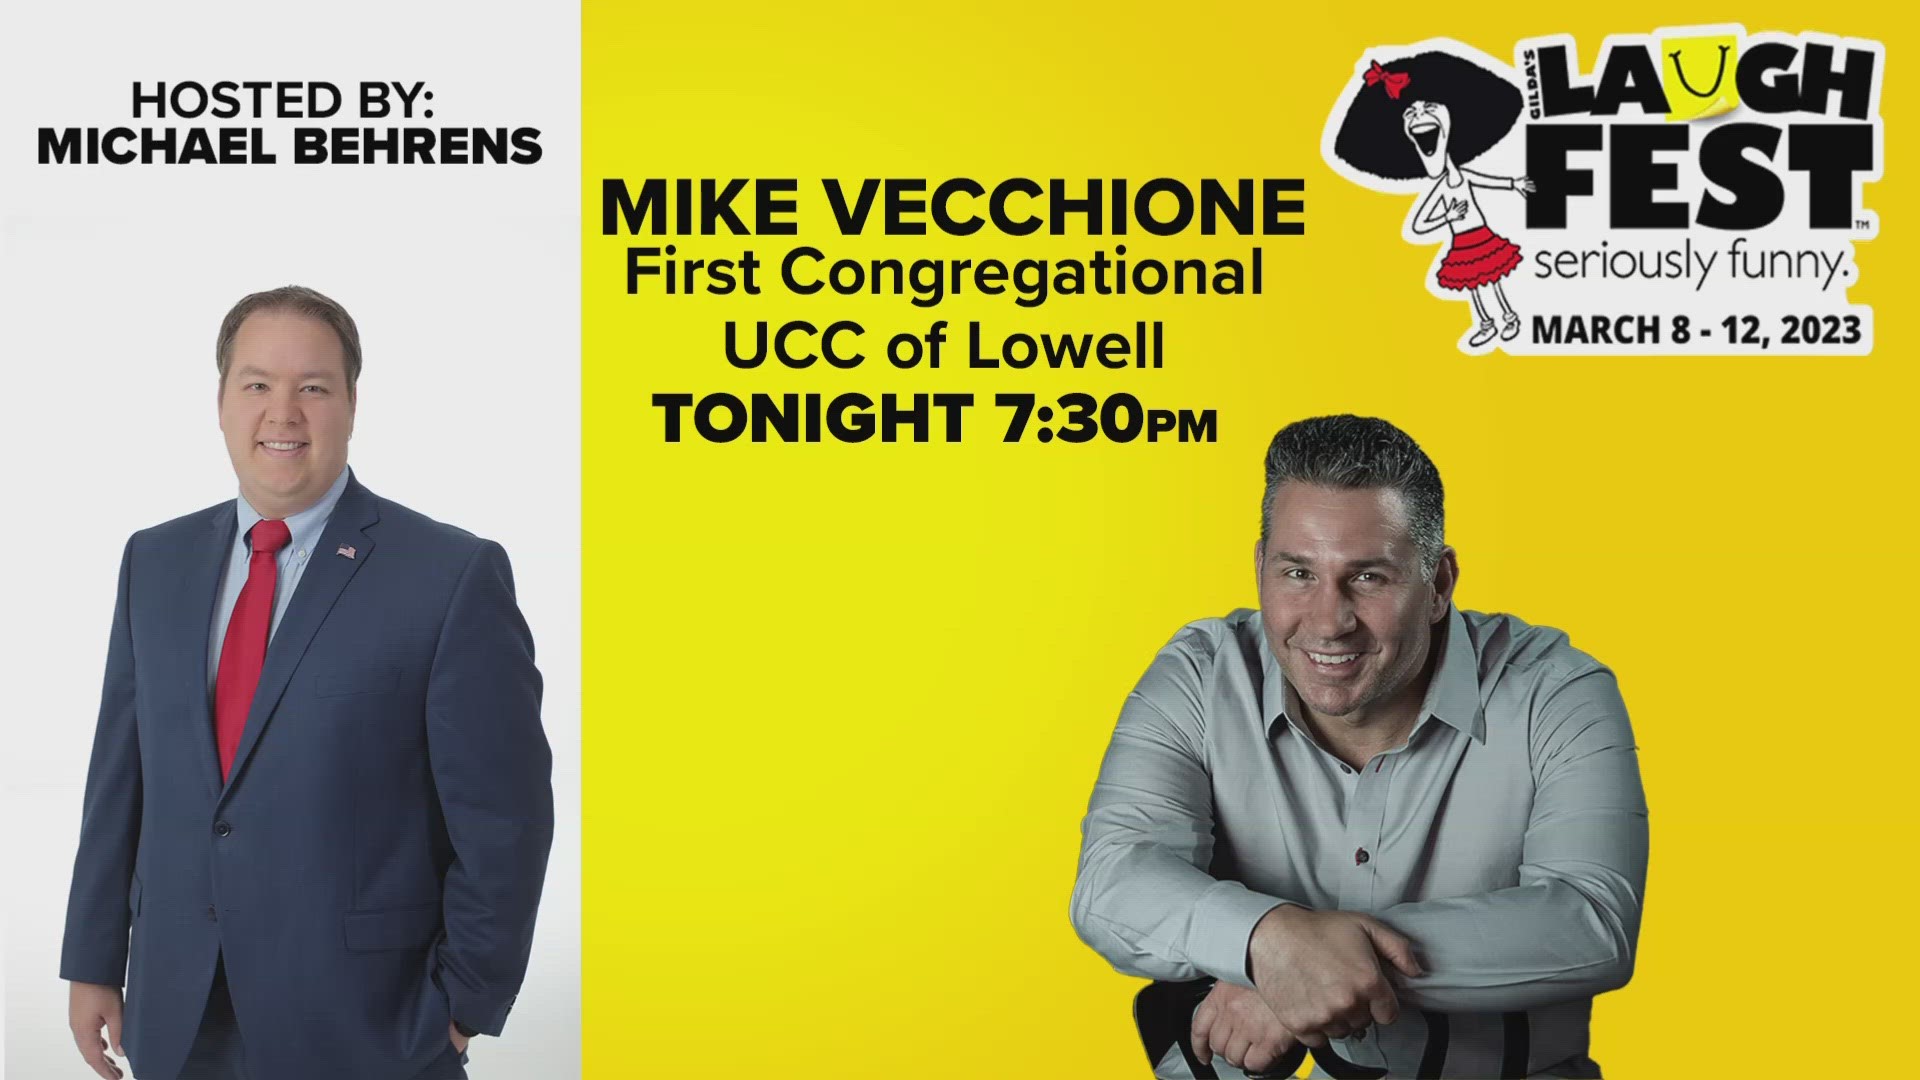 Michael Behrens hosts Mike Vecchione at the First Congregational UCC of Lowell Friday night at 7:30 p.m.